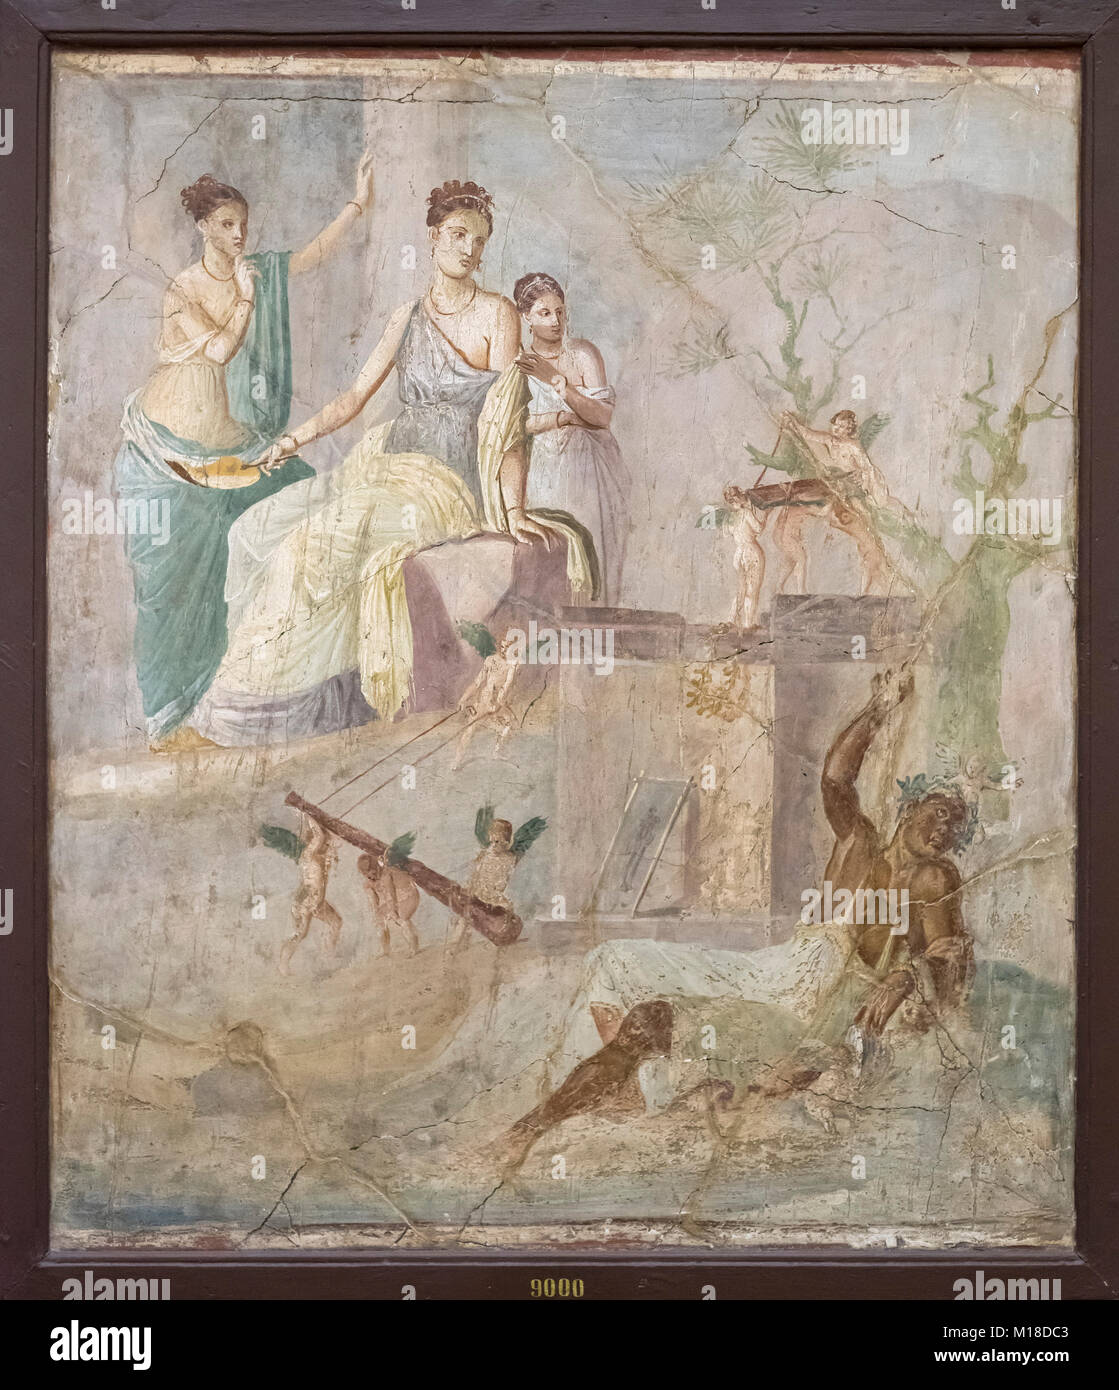 Naples. Italy. Roman fresco depicting Hercules and Omphale. Museo Archeologico Nazionale di Napoli. Naples National Archaeological Museum.  Roman fres Stock Photo